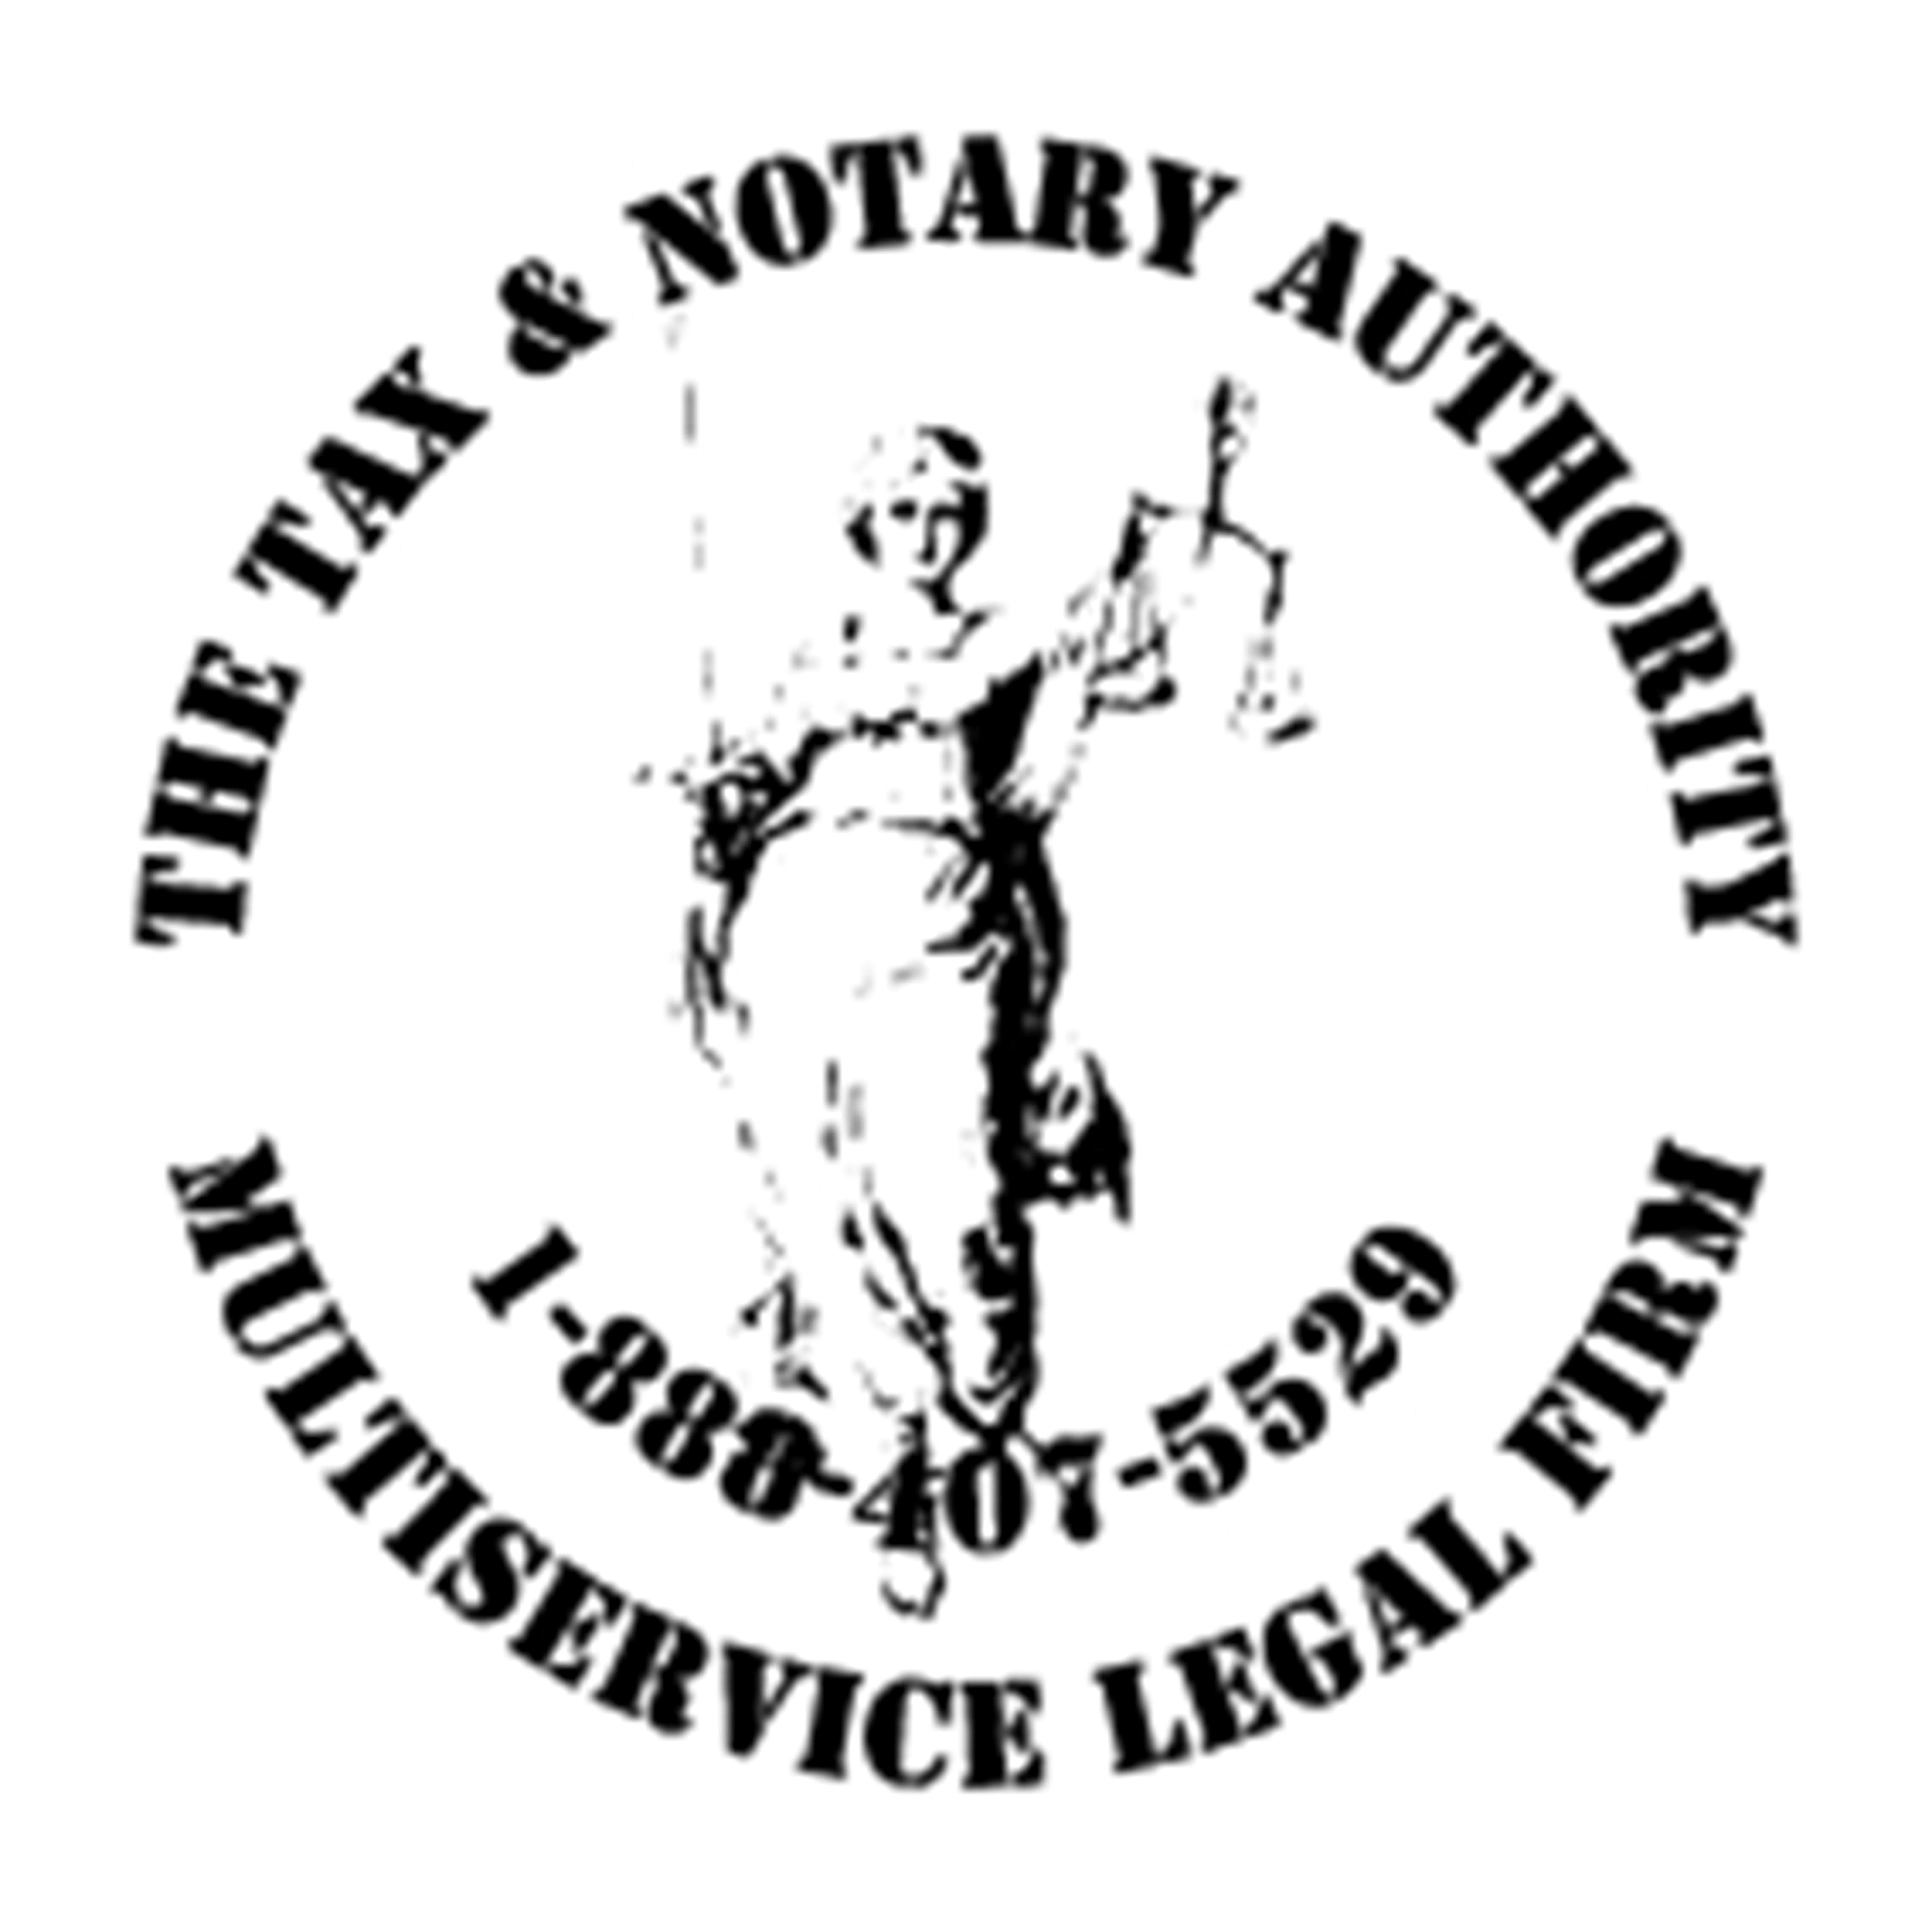 The Tax and Notary Authority, DMV, Motor Vehicles, Auto Tags. Logo